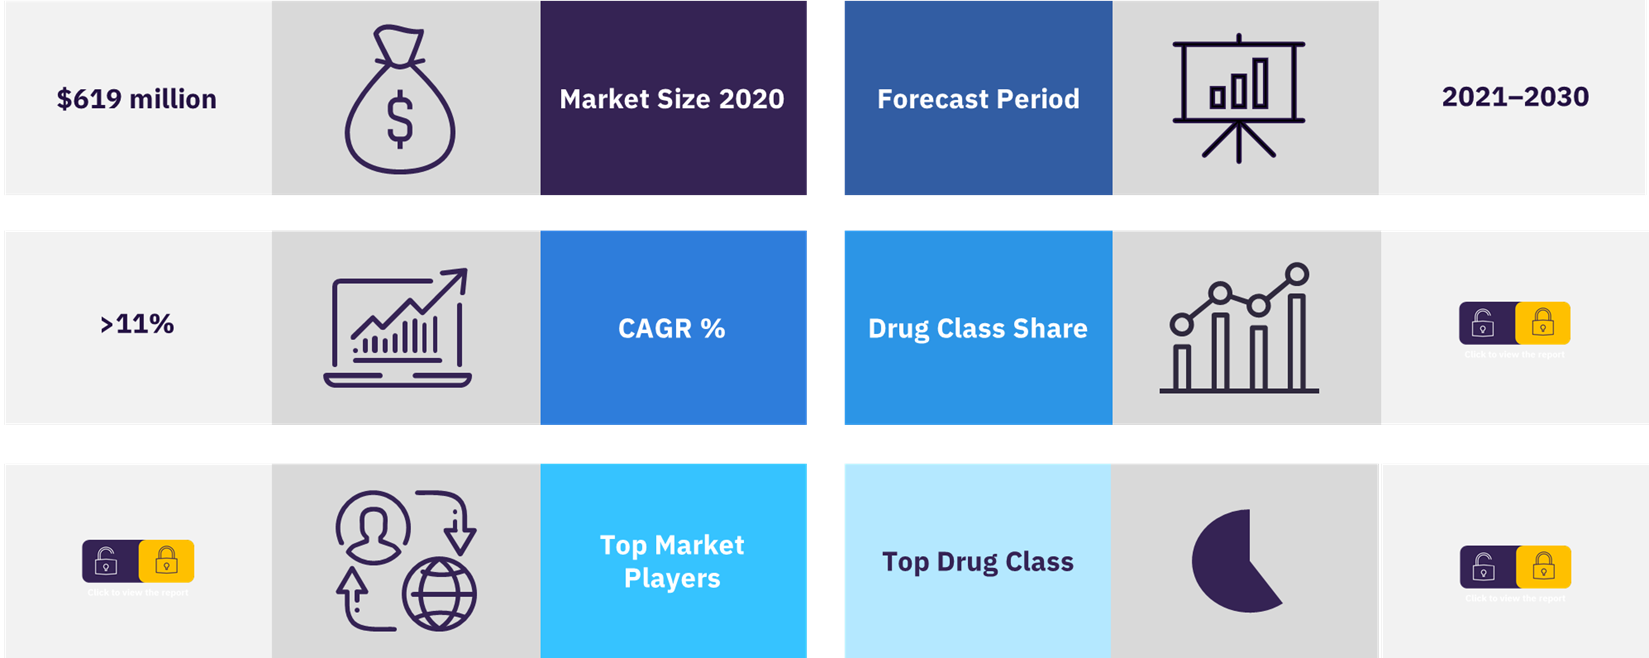 Overview of the DMD market